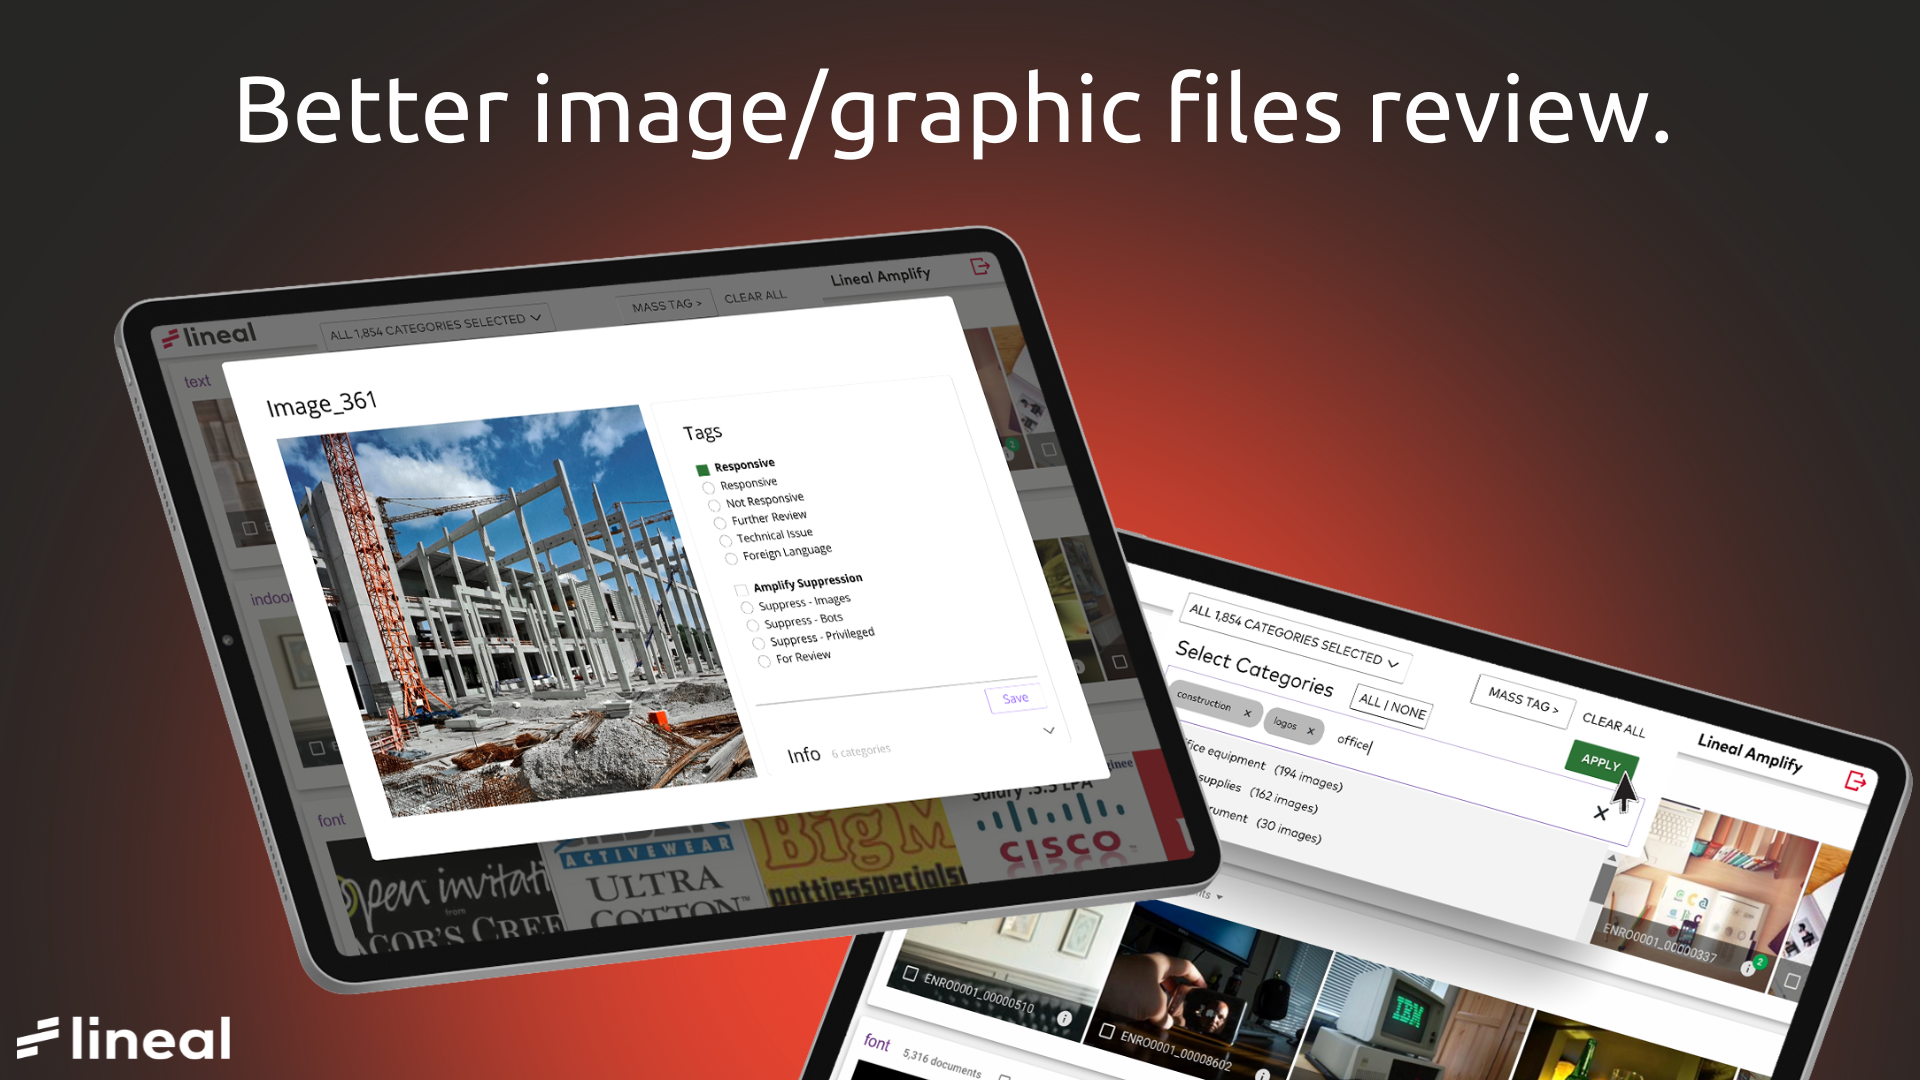 Images | Image/Graphic Files Review